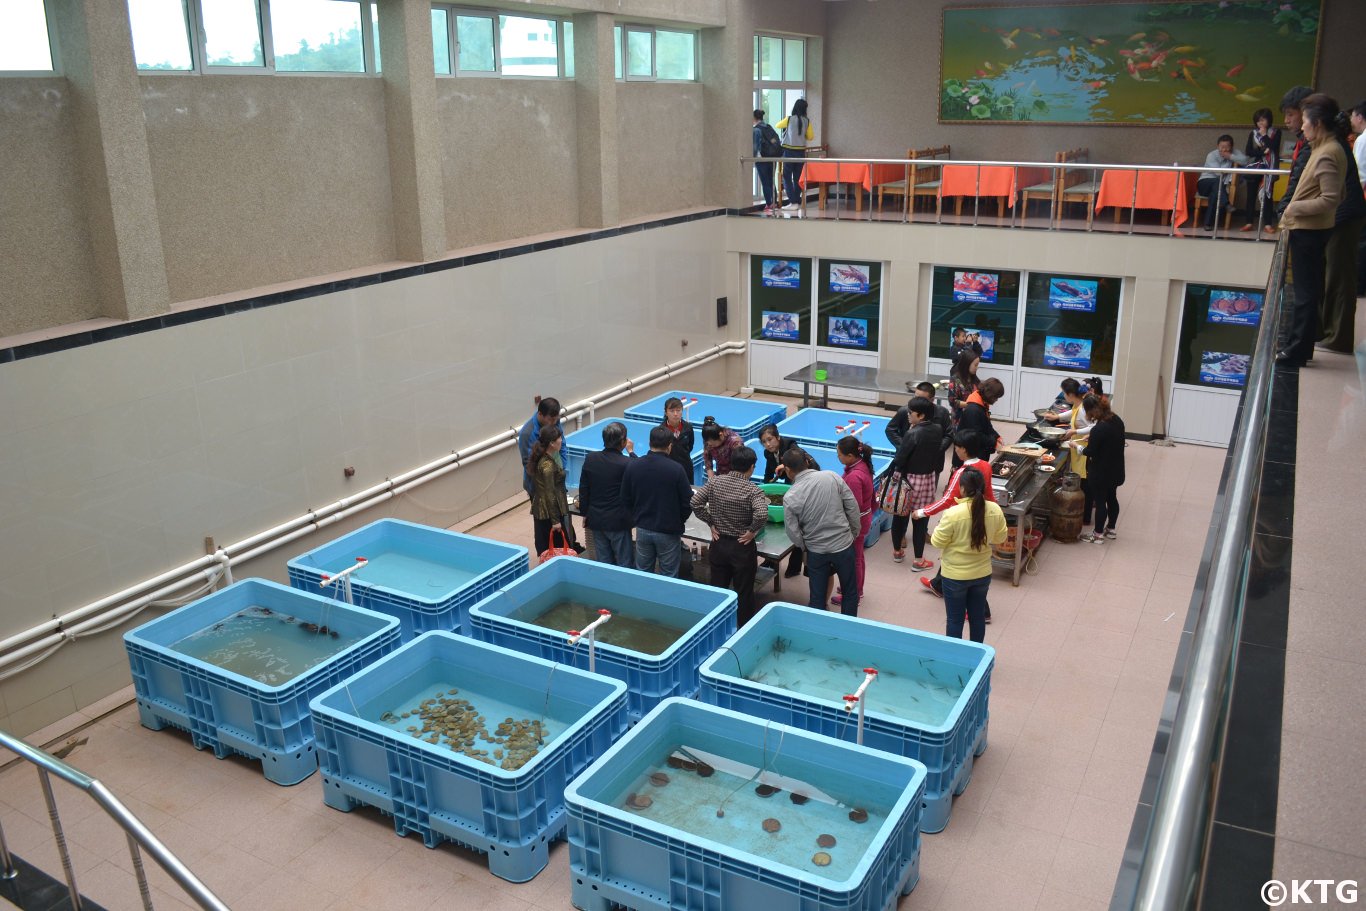 Travellers picking their food at the Taehung Rason Corporation in Rajin, DPRK (North Korea). KTG Tours